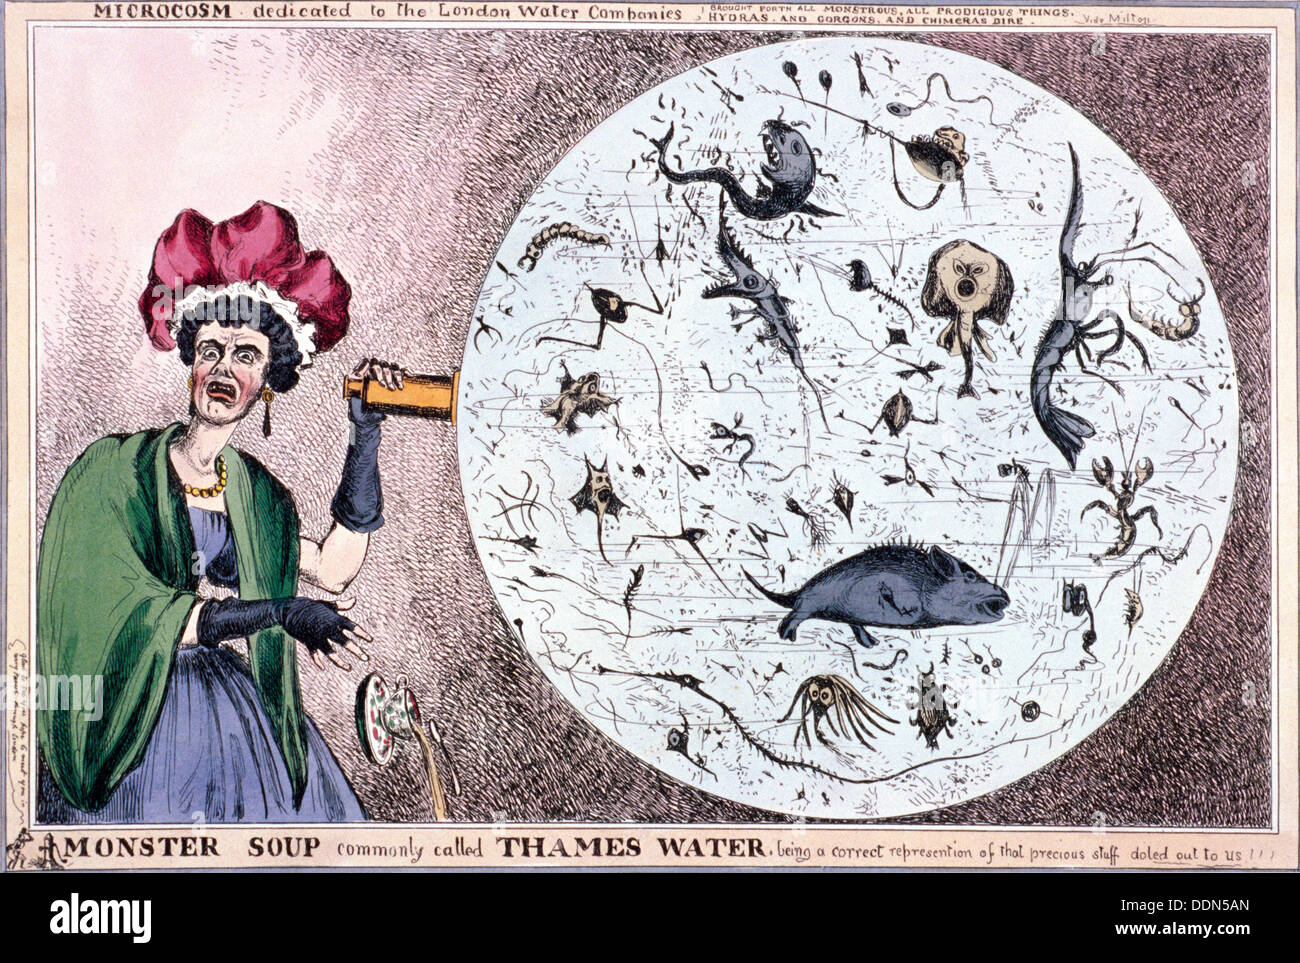 'Monster soup commonly called Thames water...', 1828. Artist: Thomas McLean Stock Photo